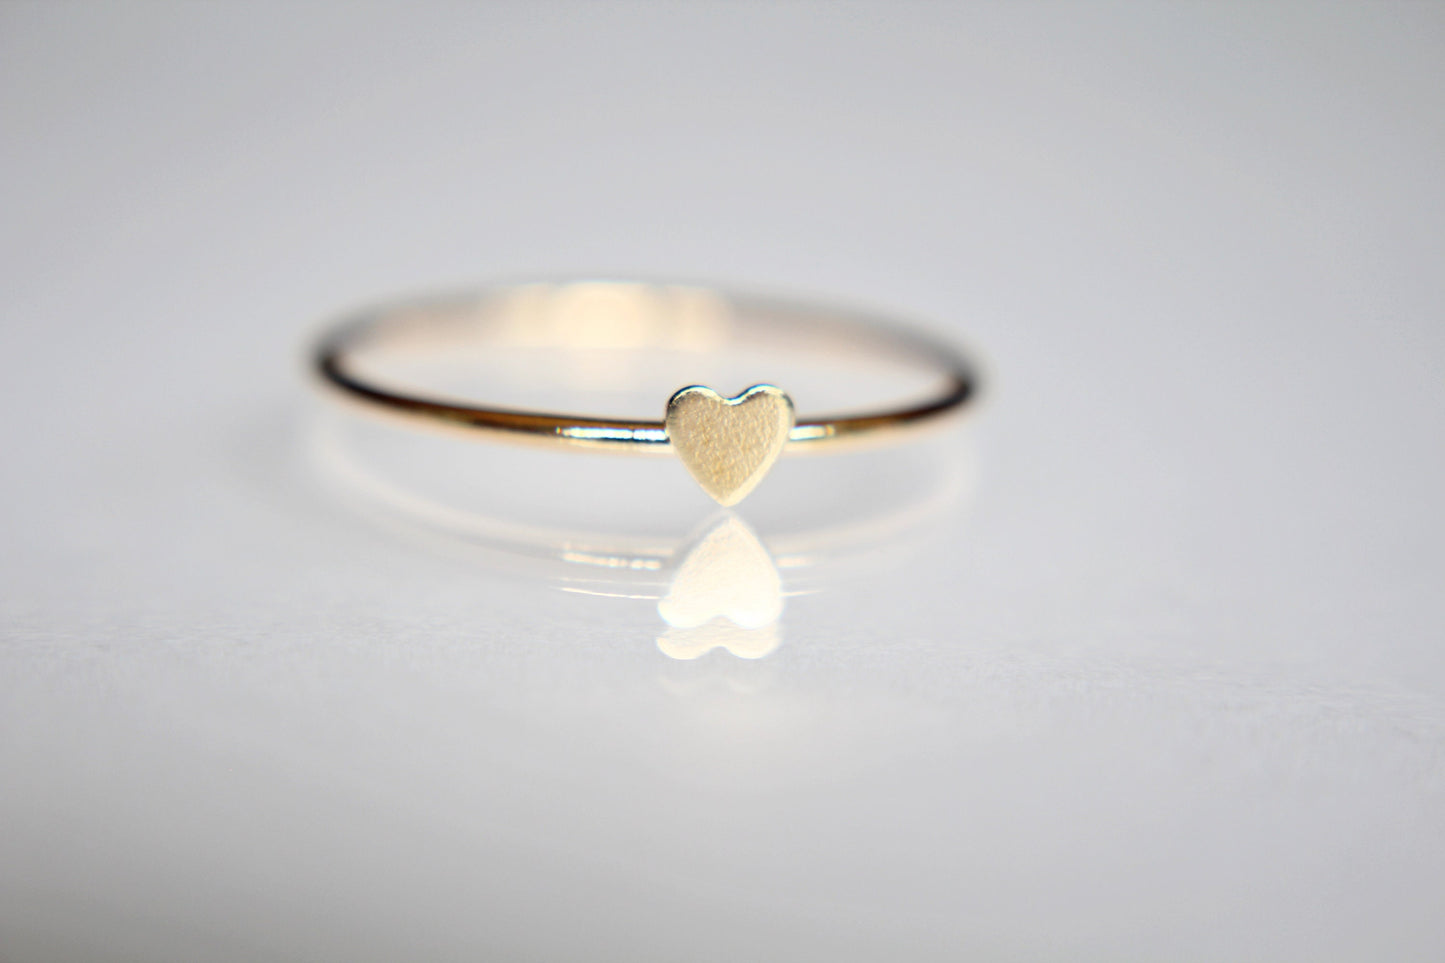 Skinny Solid Gold Heart Stacking Ring,Personalized Rings,Minimalist Rings,Heart Rings,Slim Stacking Rings,Gold Ring, Rings,Couples Rings